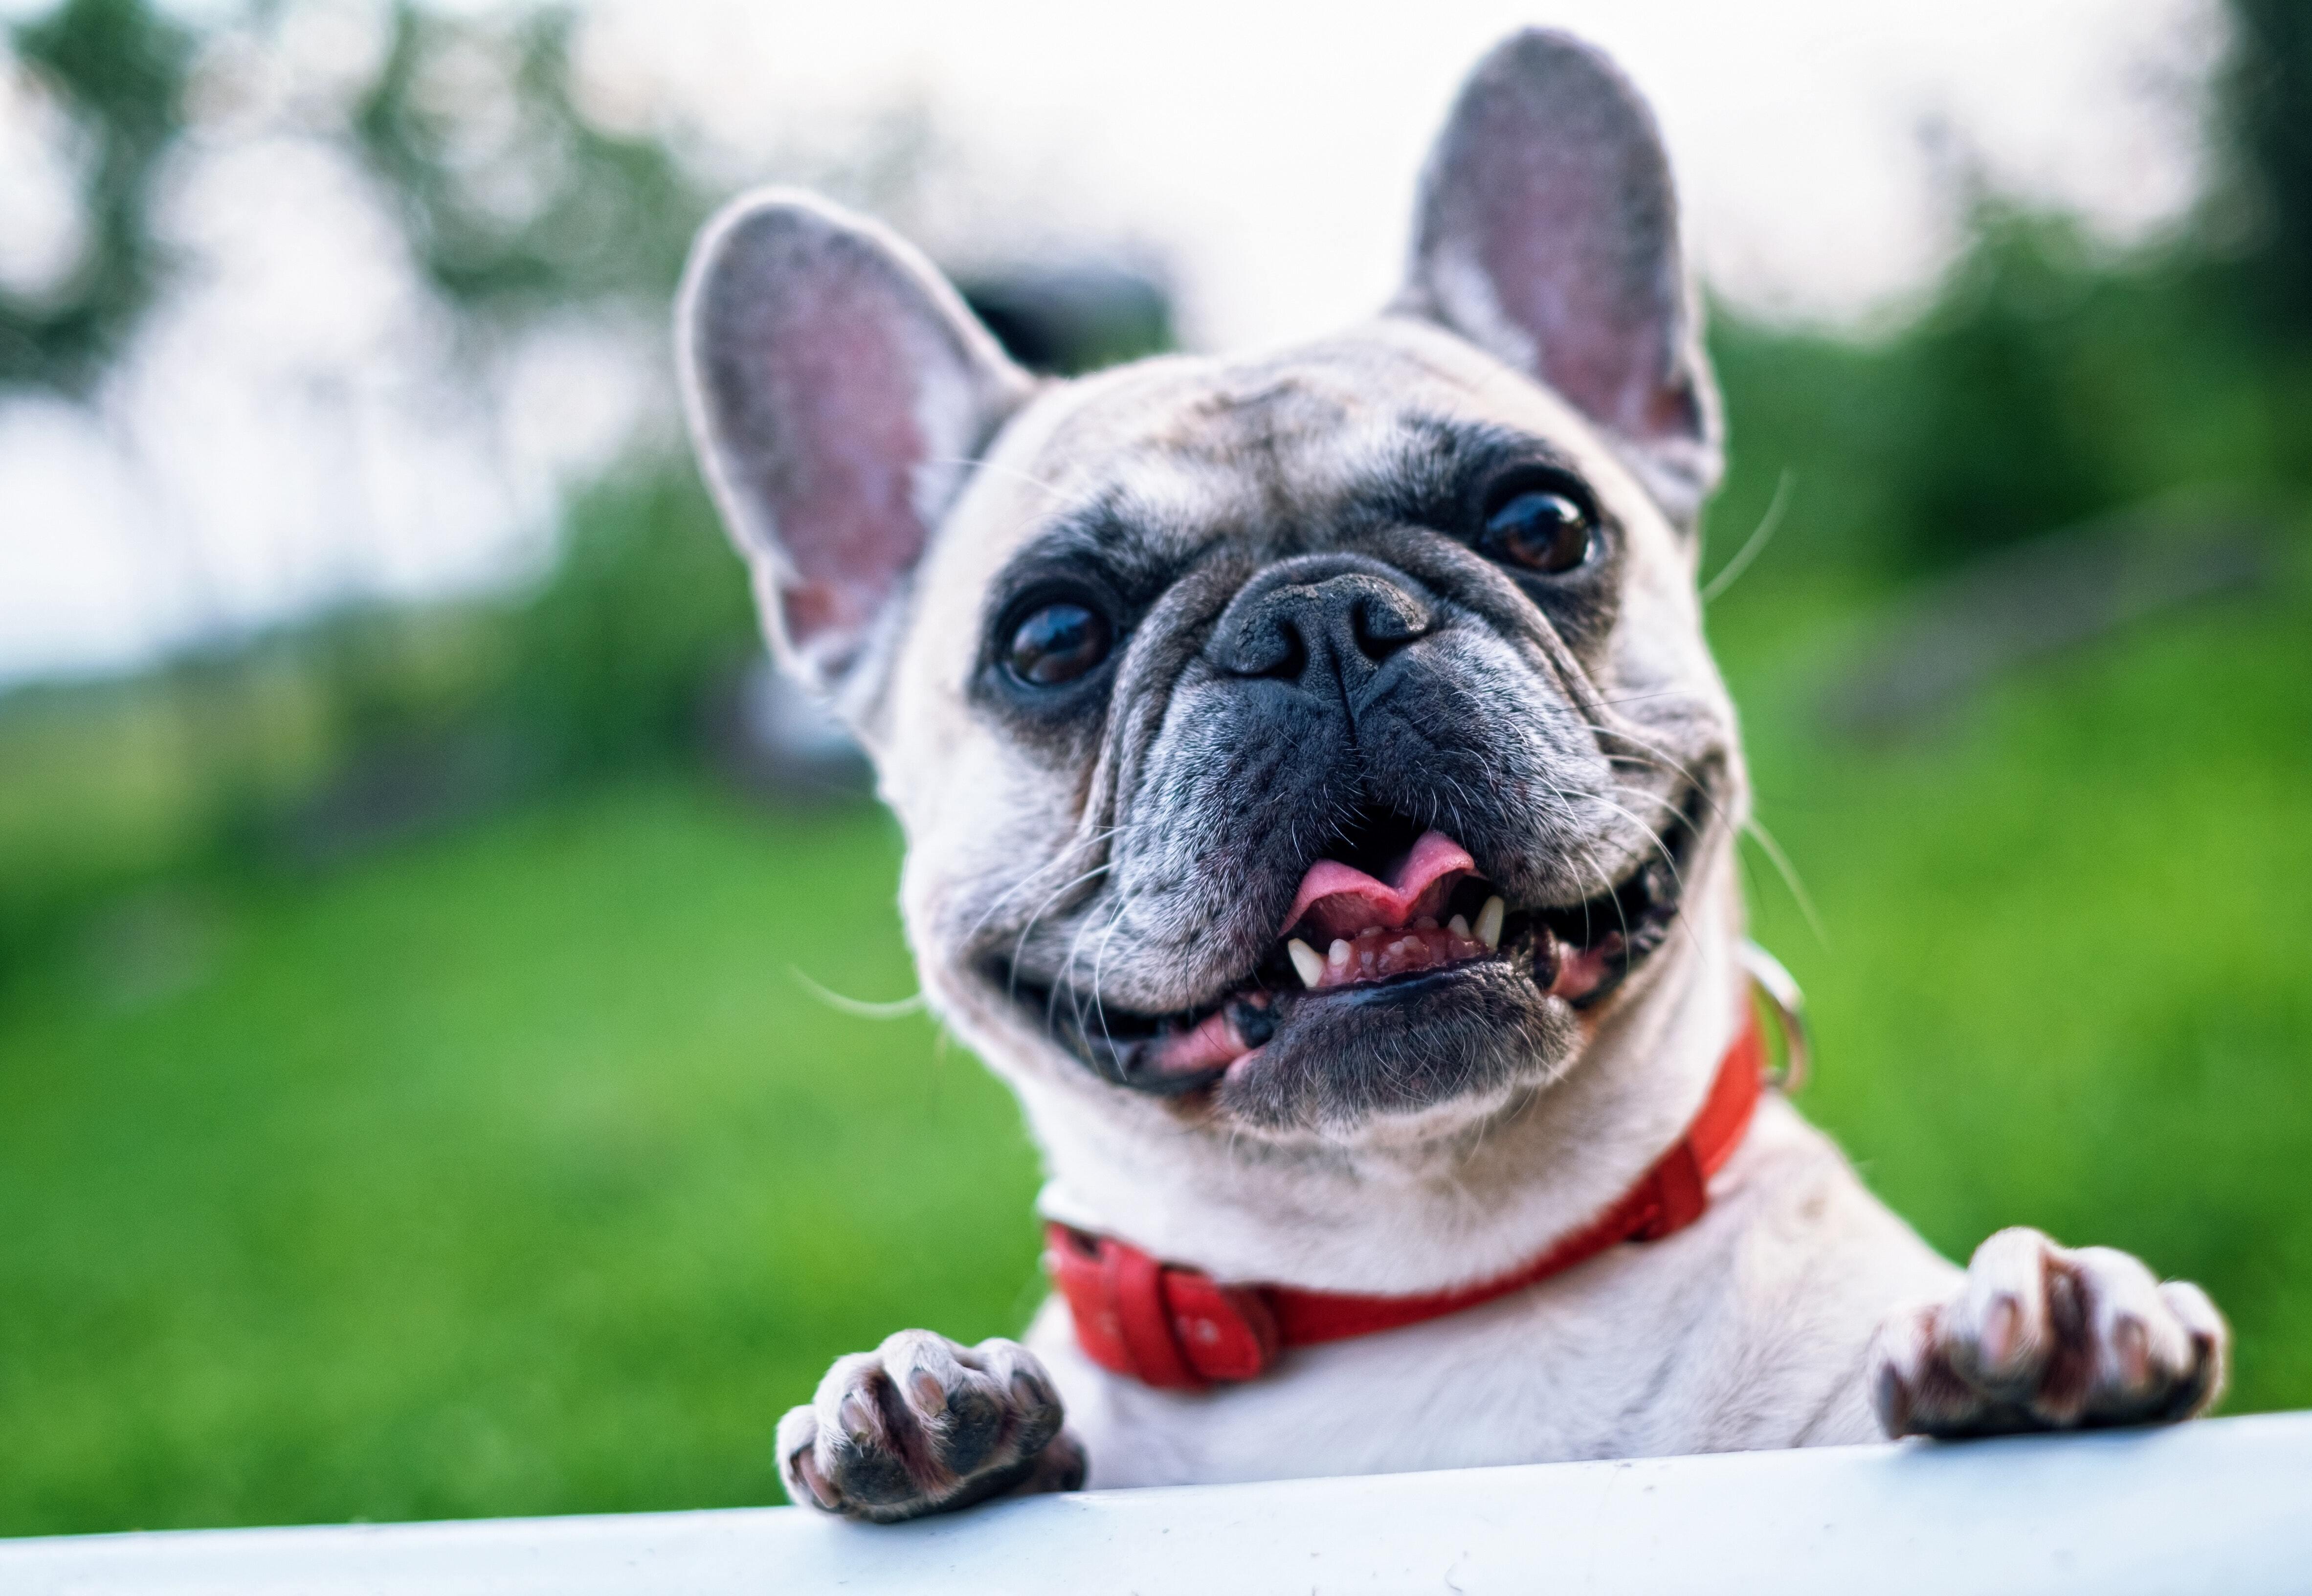 bulldog on fence with red collar 